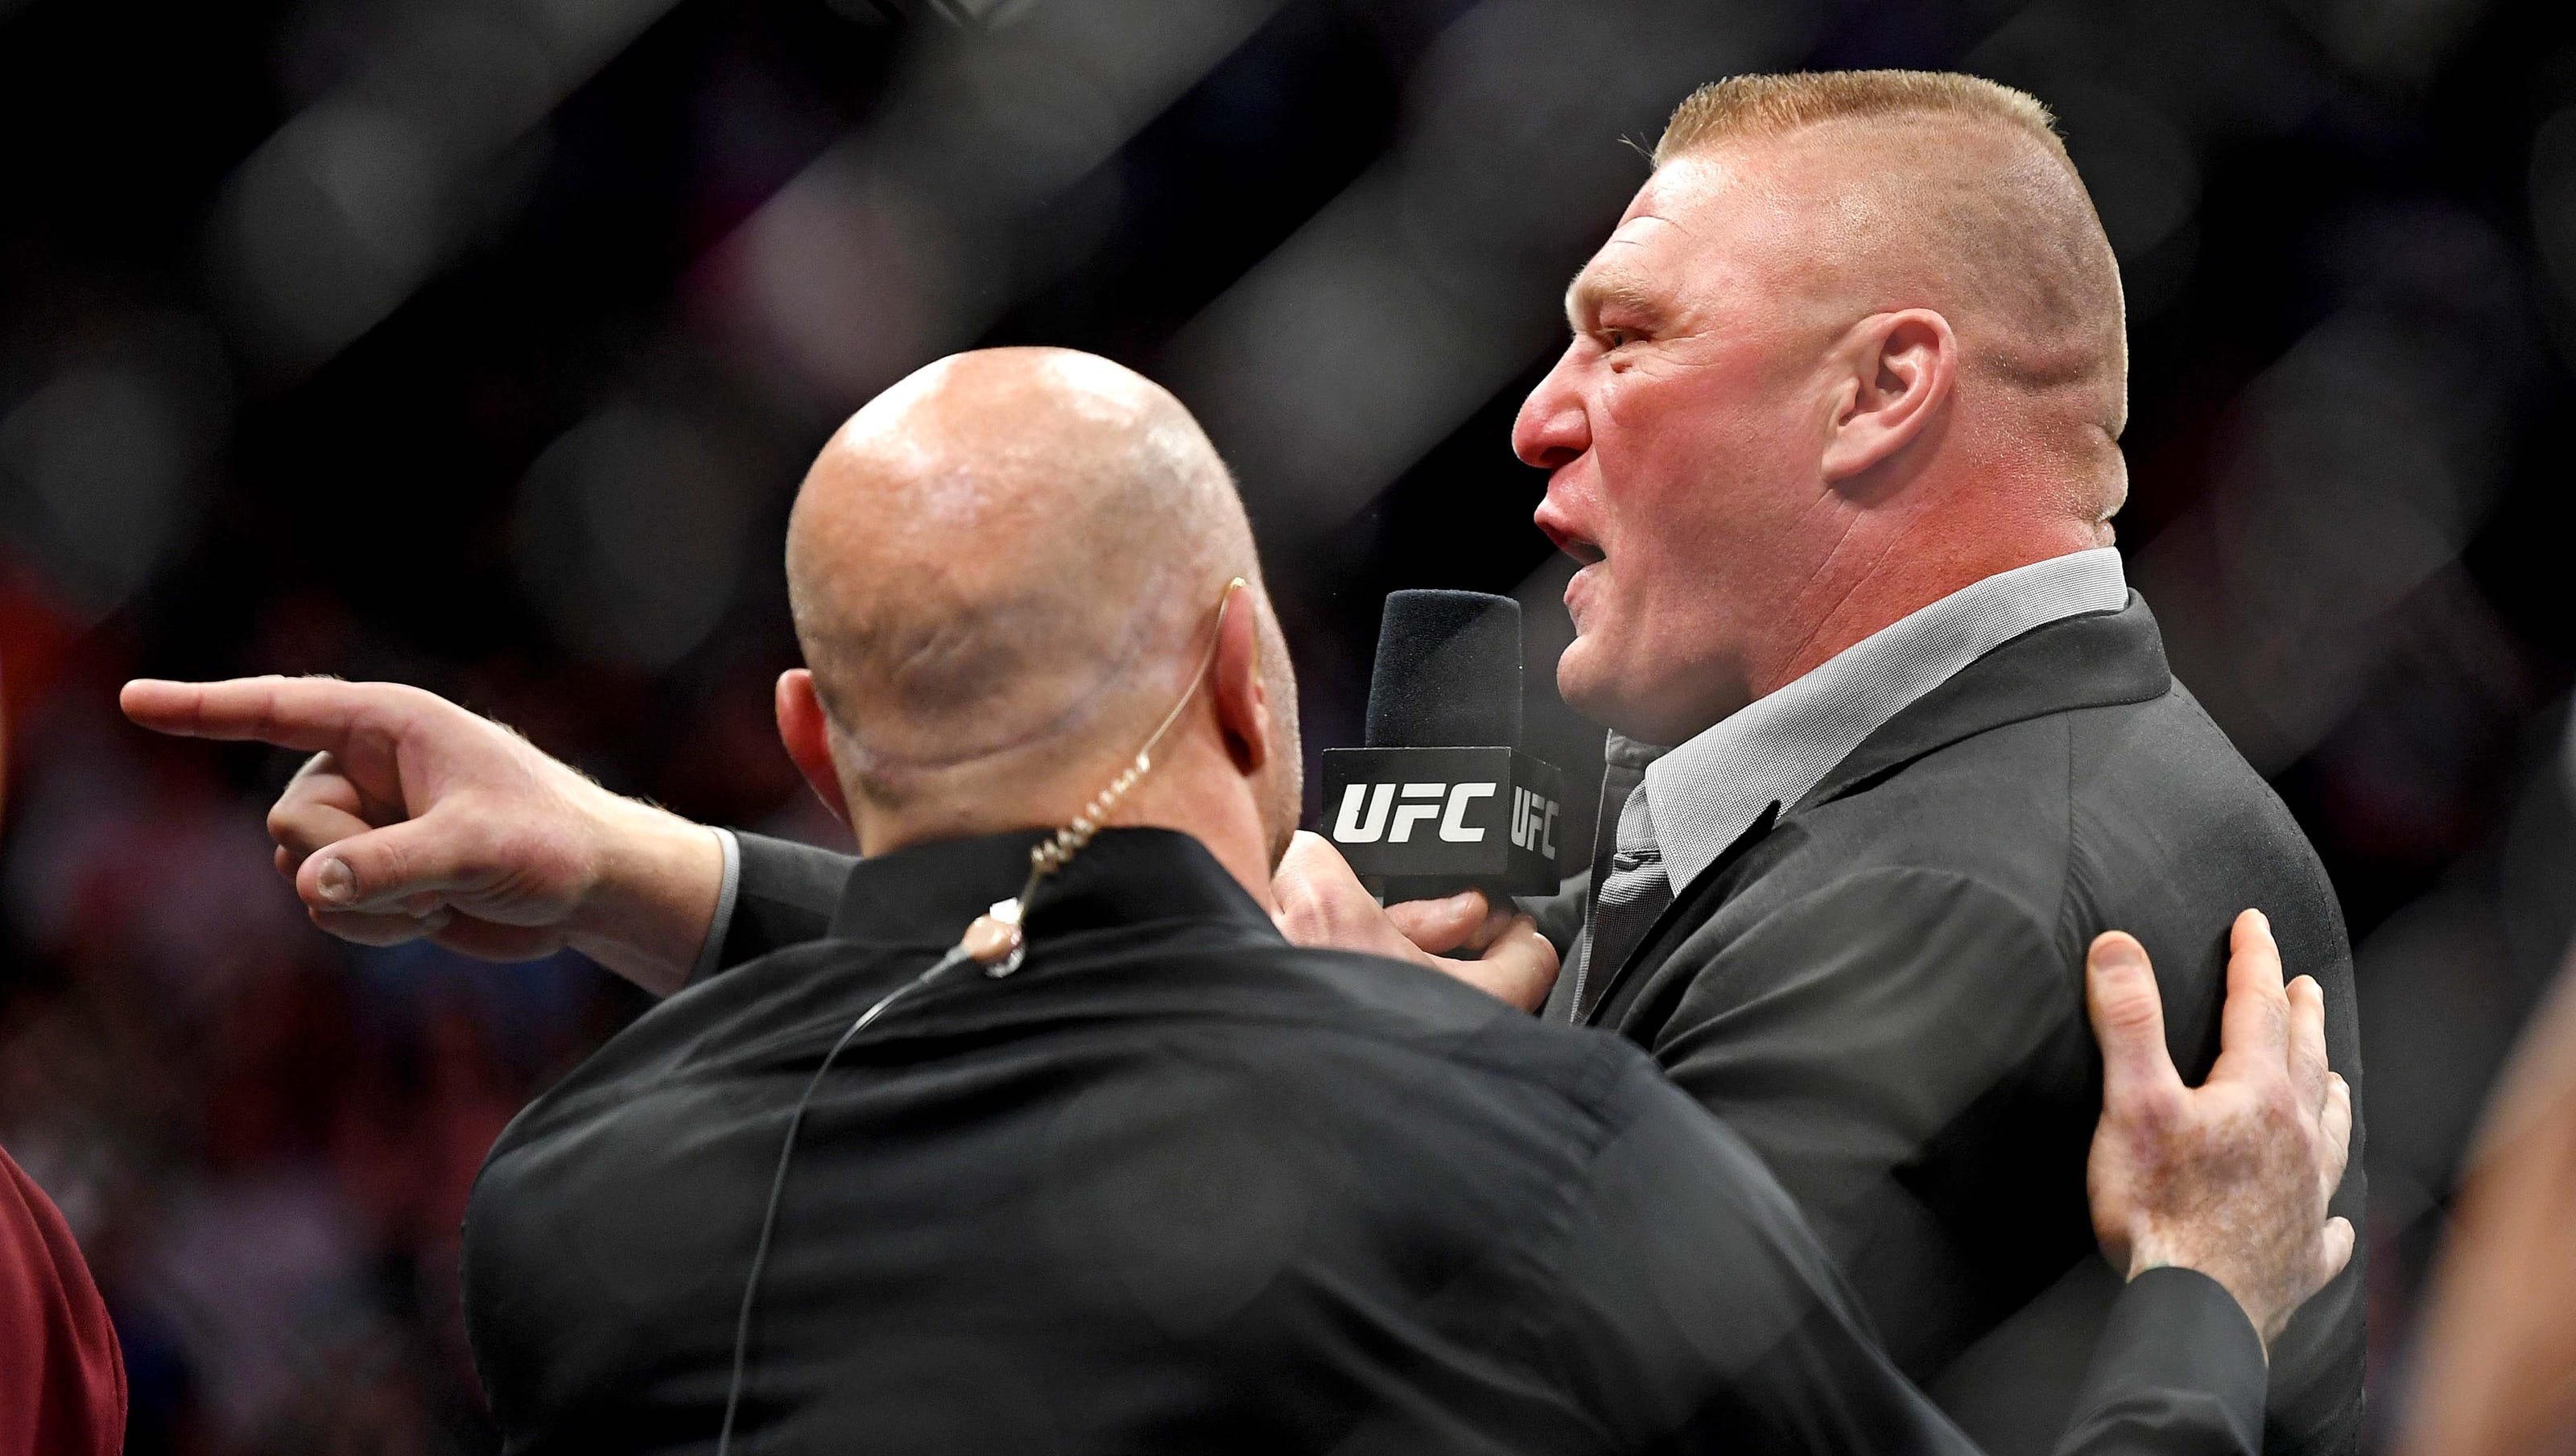 Brock Lesnar eligible to return to UFC in January 2019